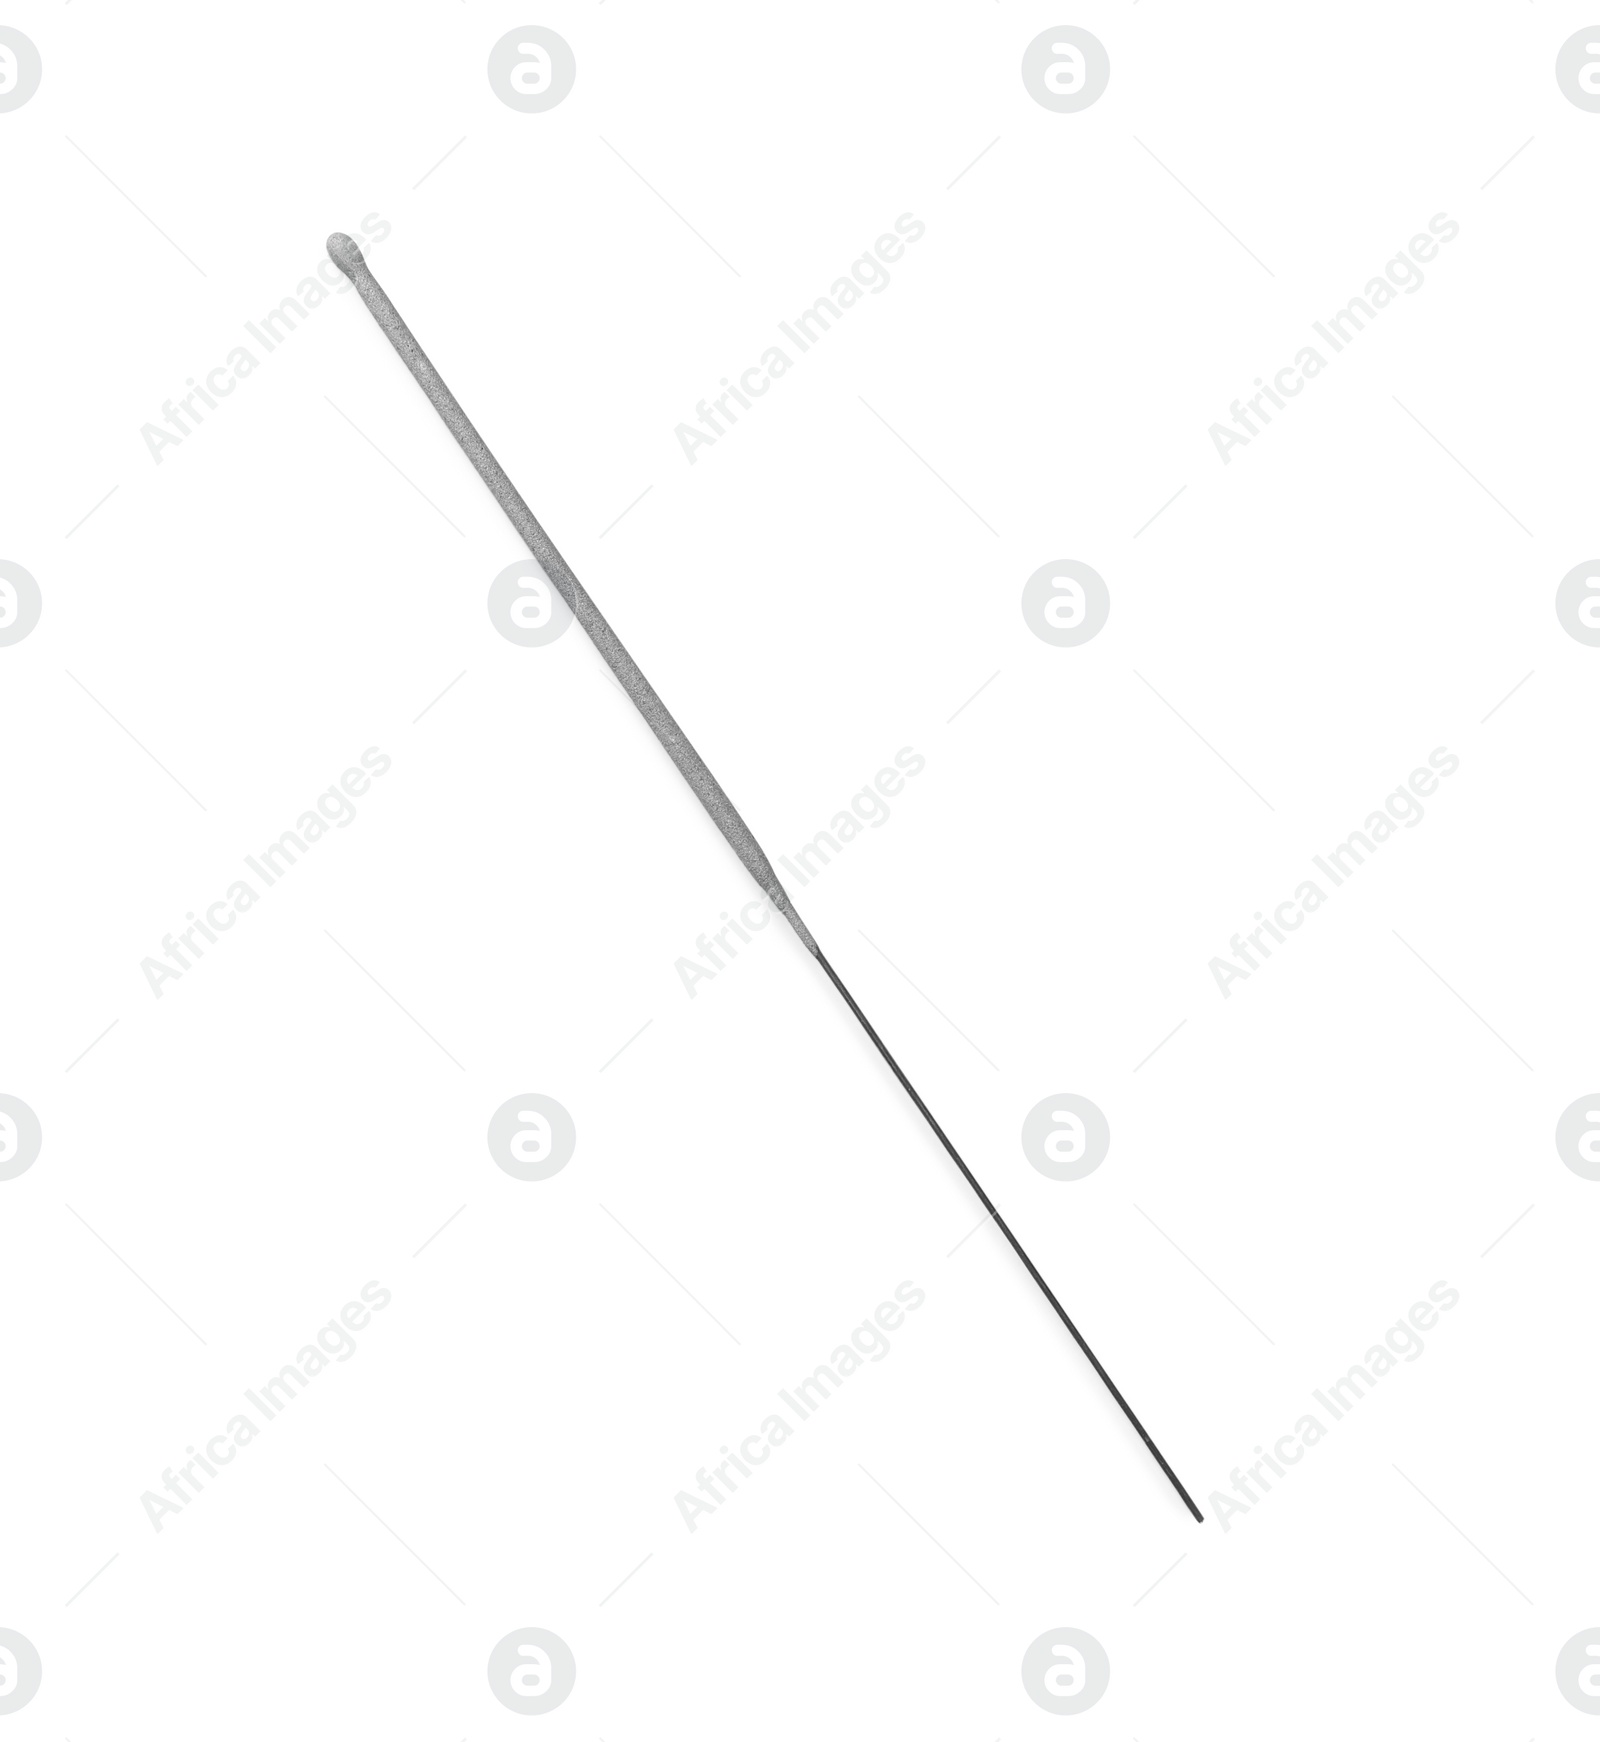 Photo of One new sparkler stick isolated on white